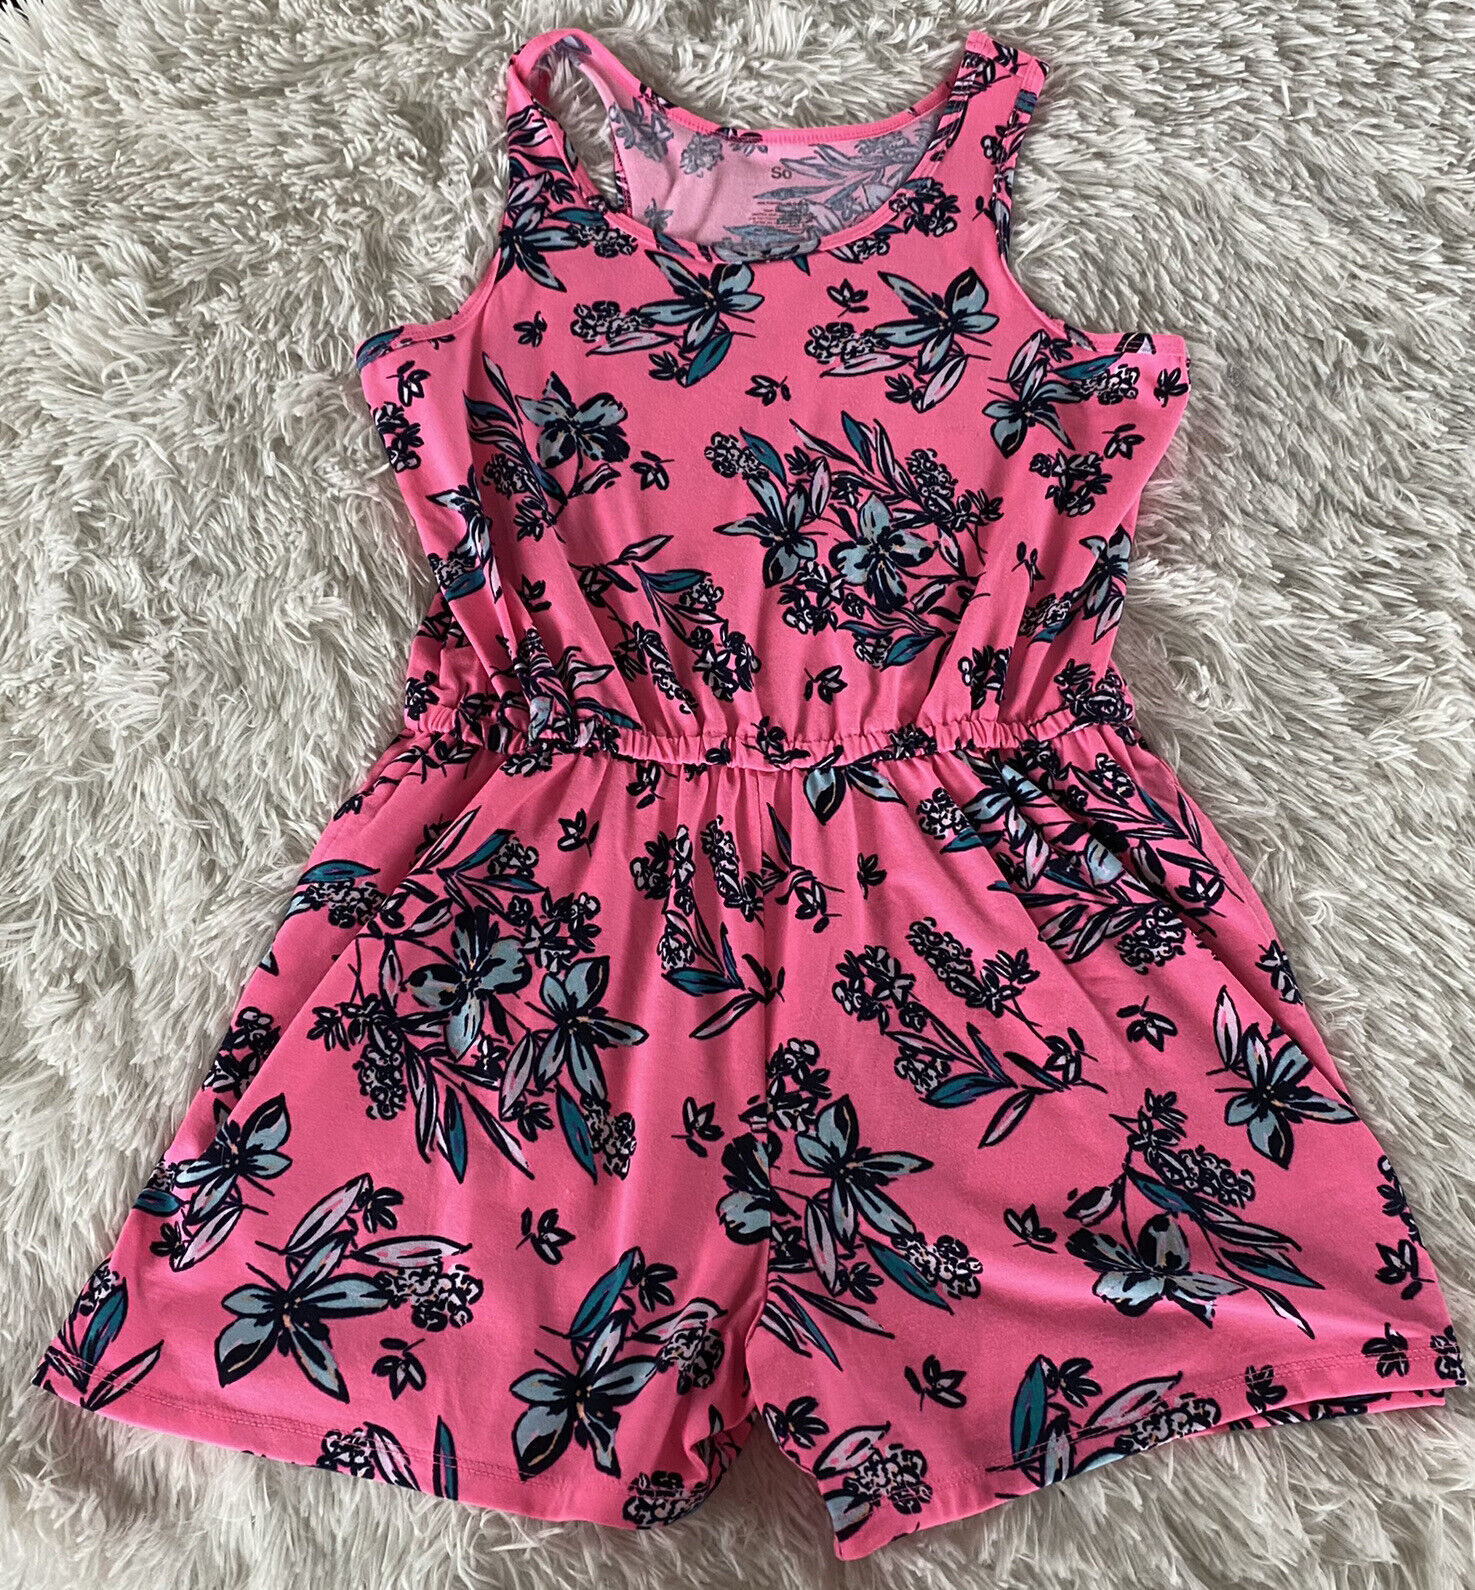 Girls Floral Romper Size Xxl Free shipping New 16 Sleevele Pink Neon free Waist Elastic